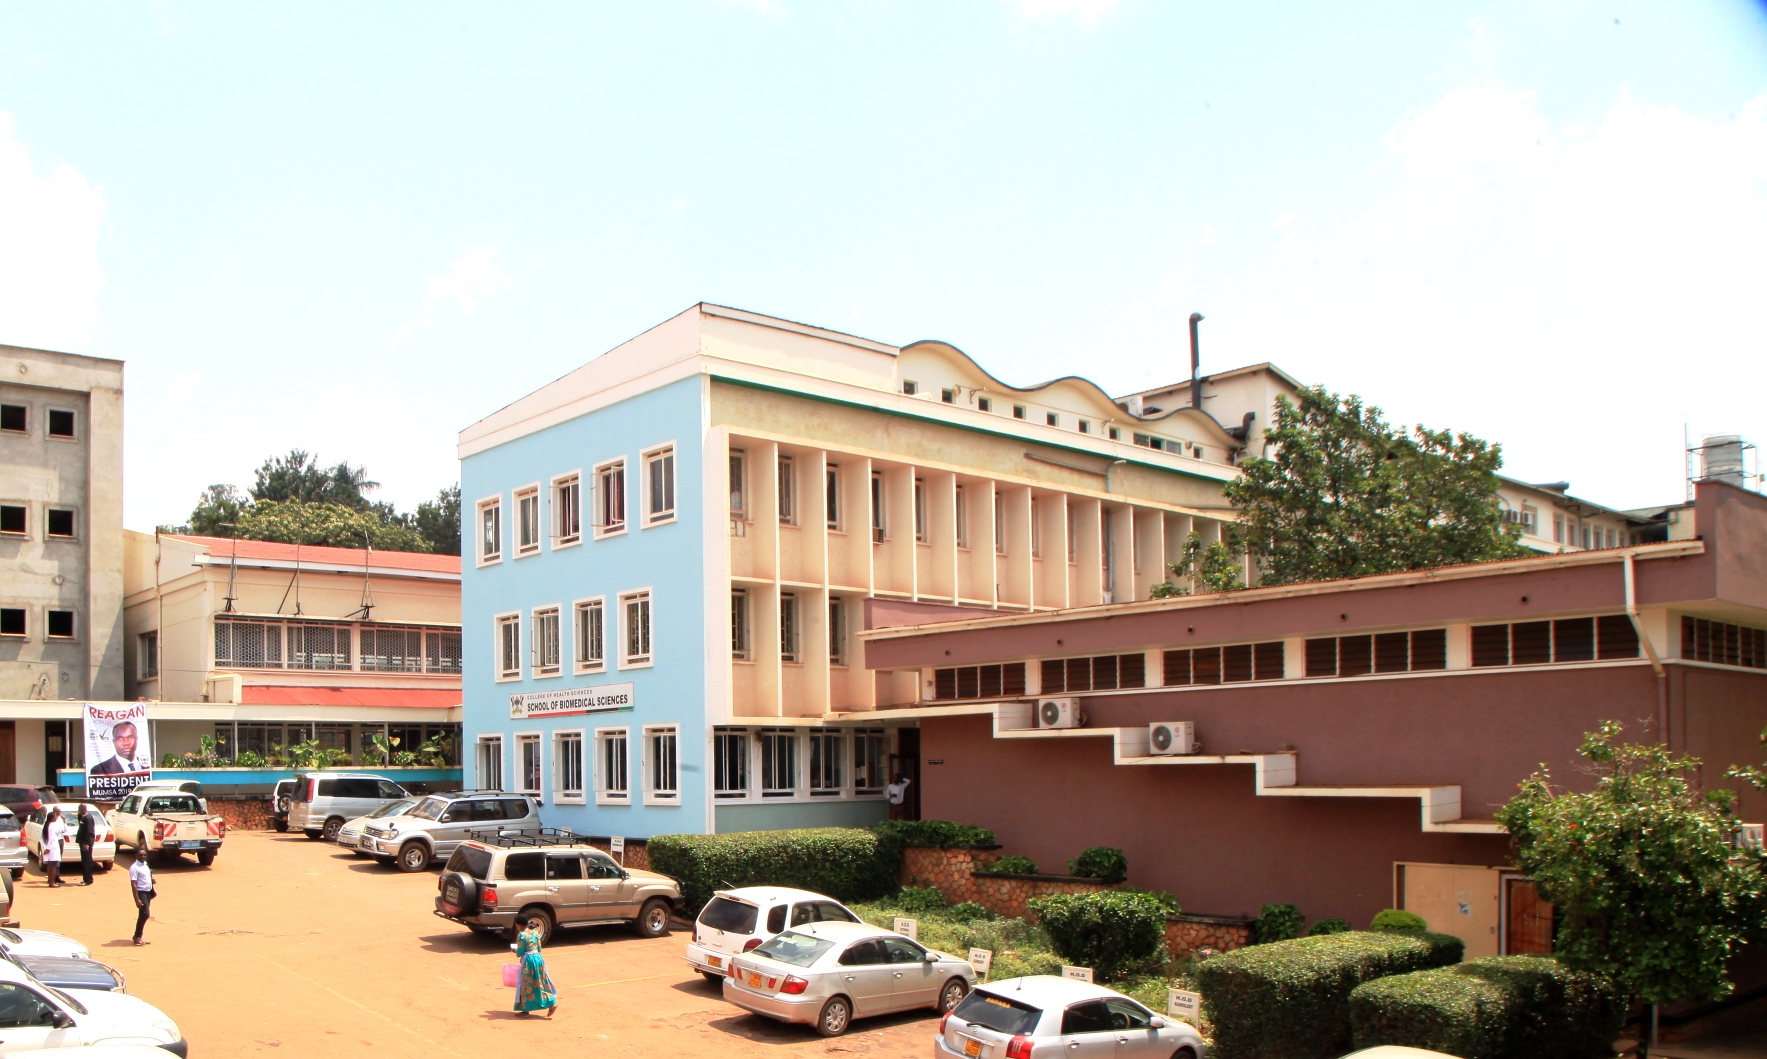 The Davies Lecture Theatre (Right), School of Biomedical Sciences (Blue) and other buildings at the College of Health Sciences (CHS), Mulago Campus, Makerere University, Kampala Uganda